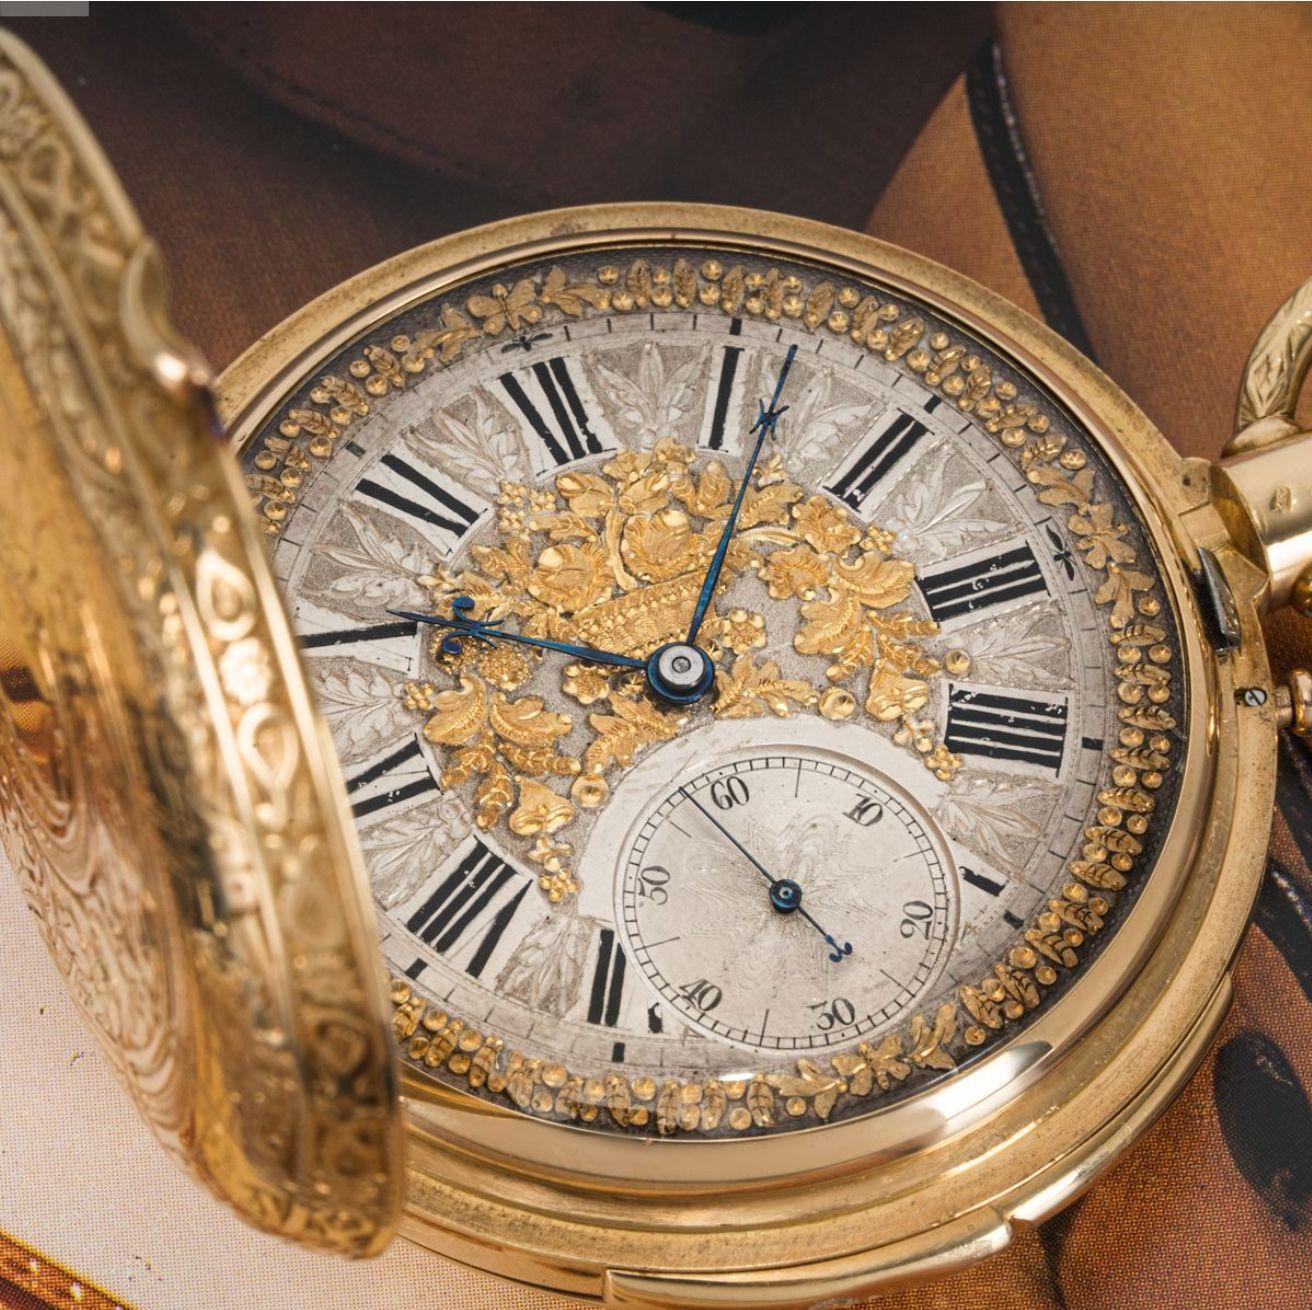 Montandon Freres. A Heavy 18ct Gold Highly Engraved Keyless Lever Minute Repeater Full Hunter Pocket Watch C1880.

Dial: The superb dial made of silver and gold decorated with a gold garland of flowers and gold flowers around the edge of the dial